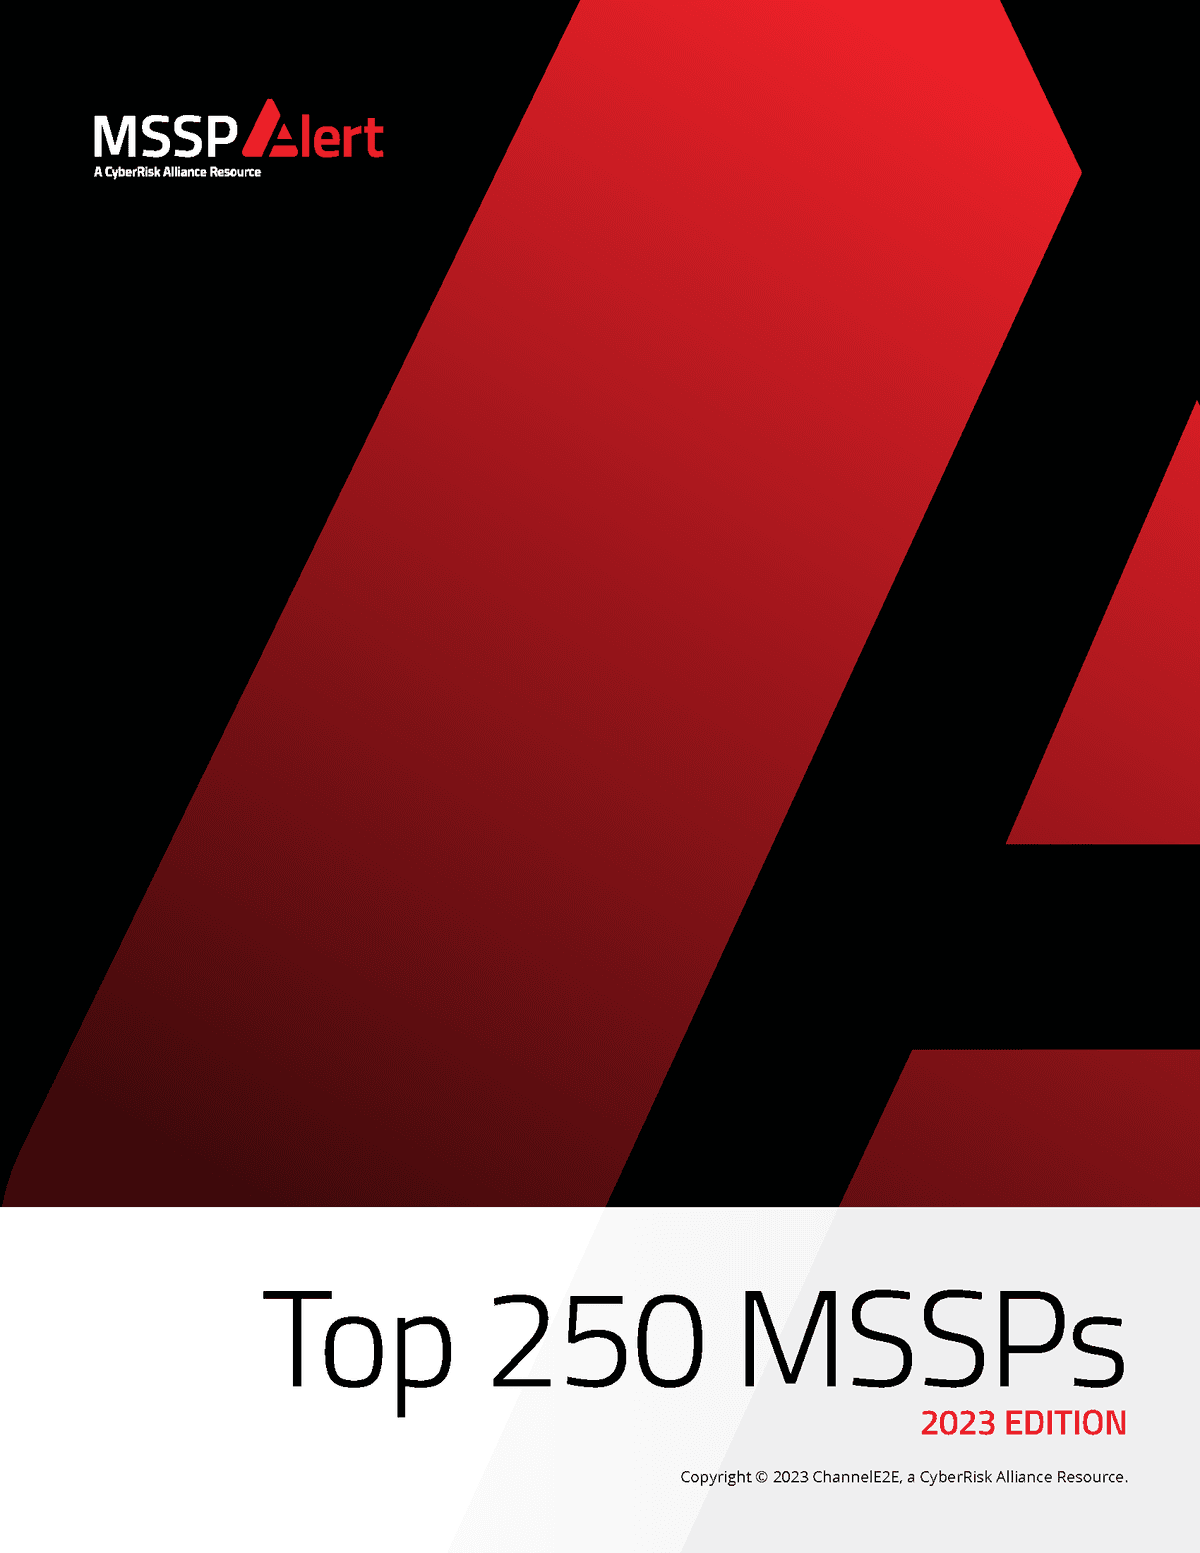 Top 250 MSSPs 2023 Edition